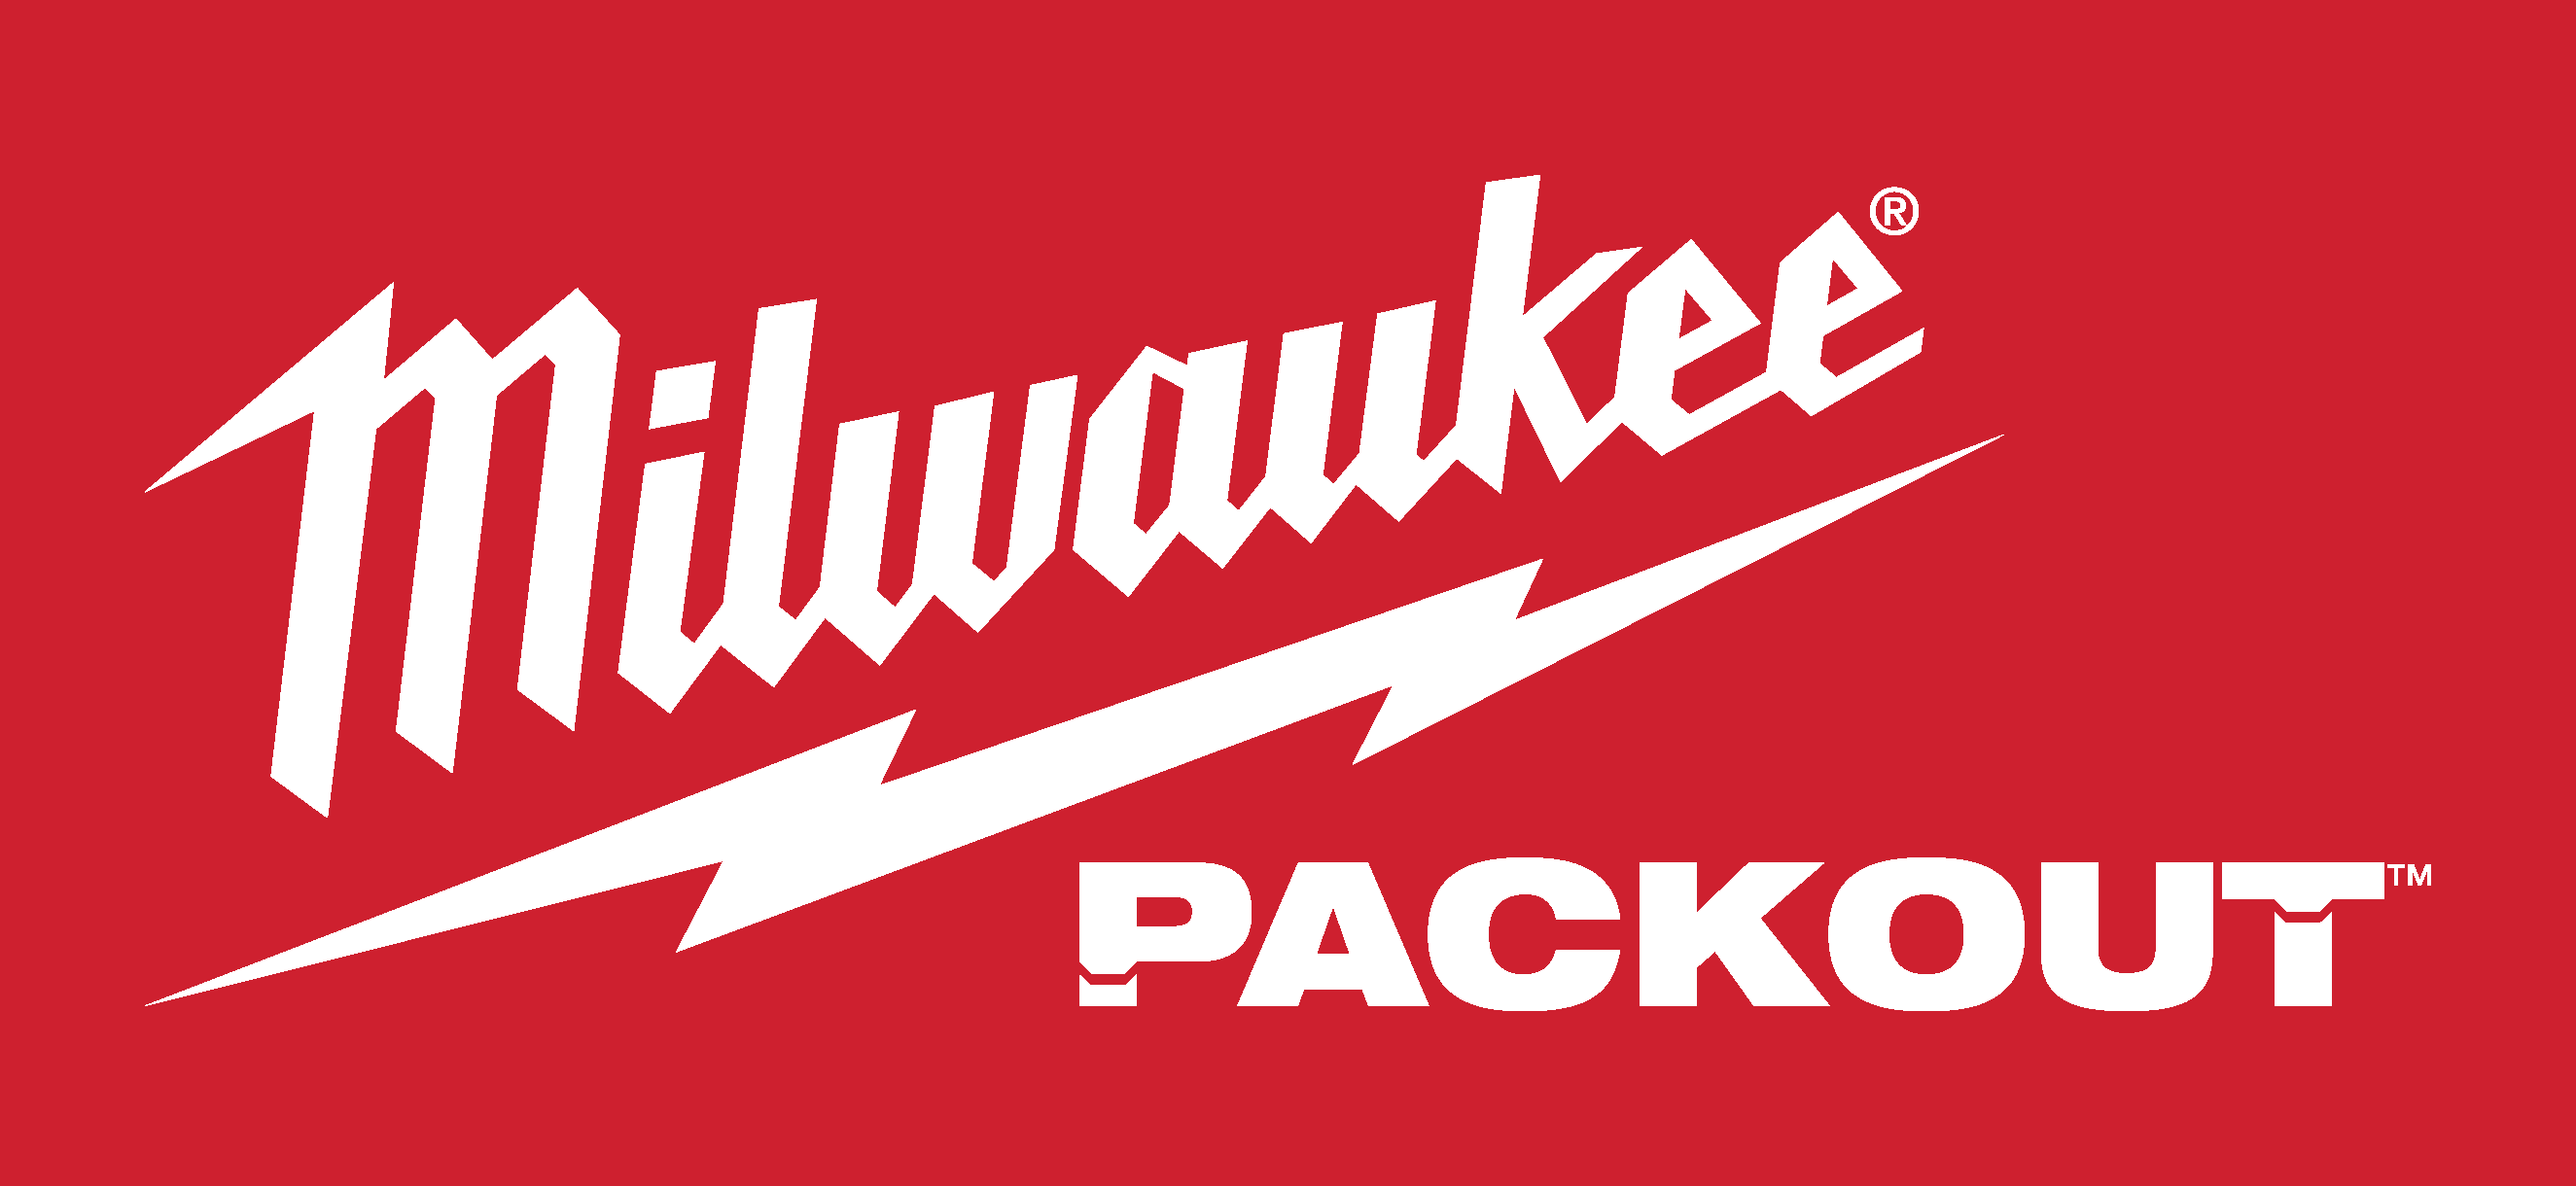 milwaukee-packout-logo_white-on-red-eng-2